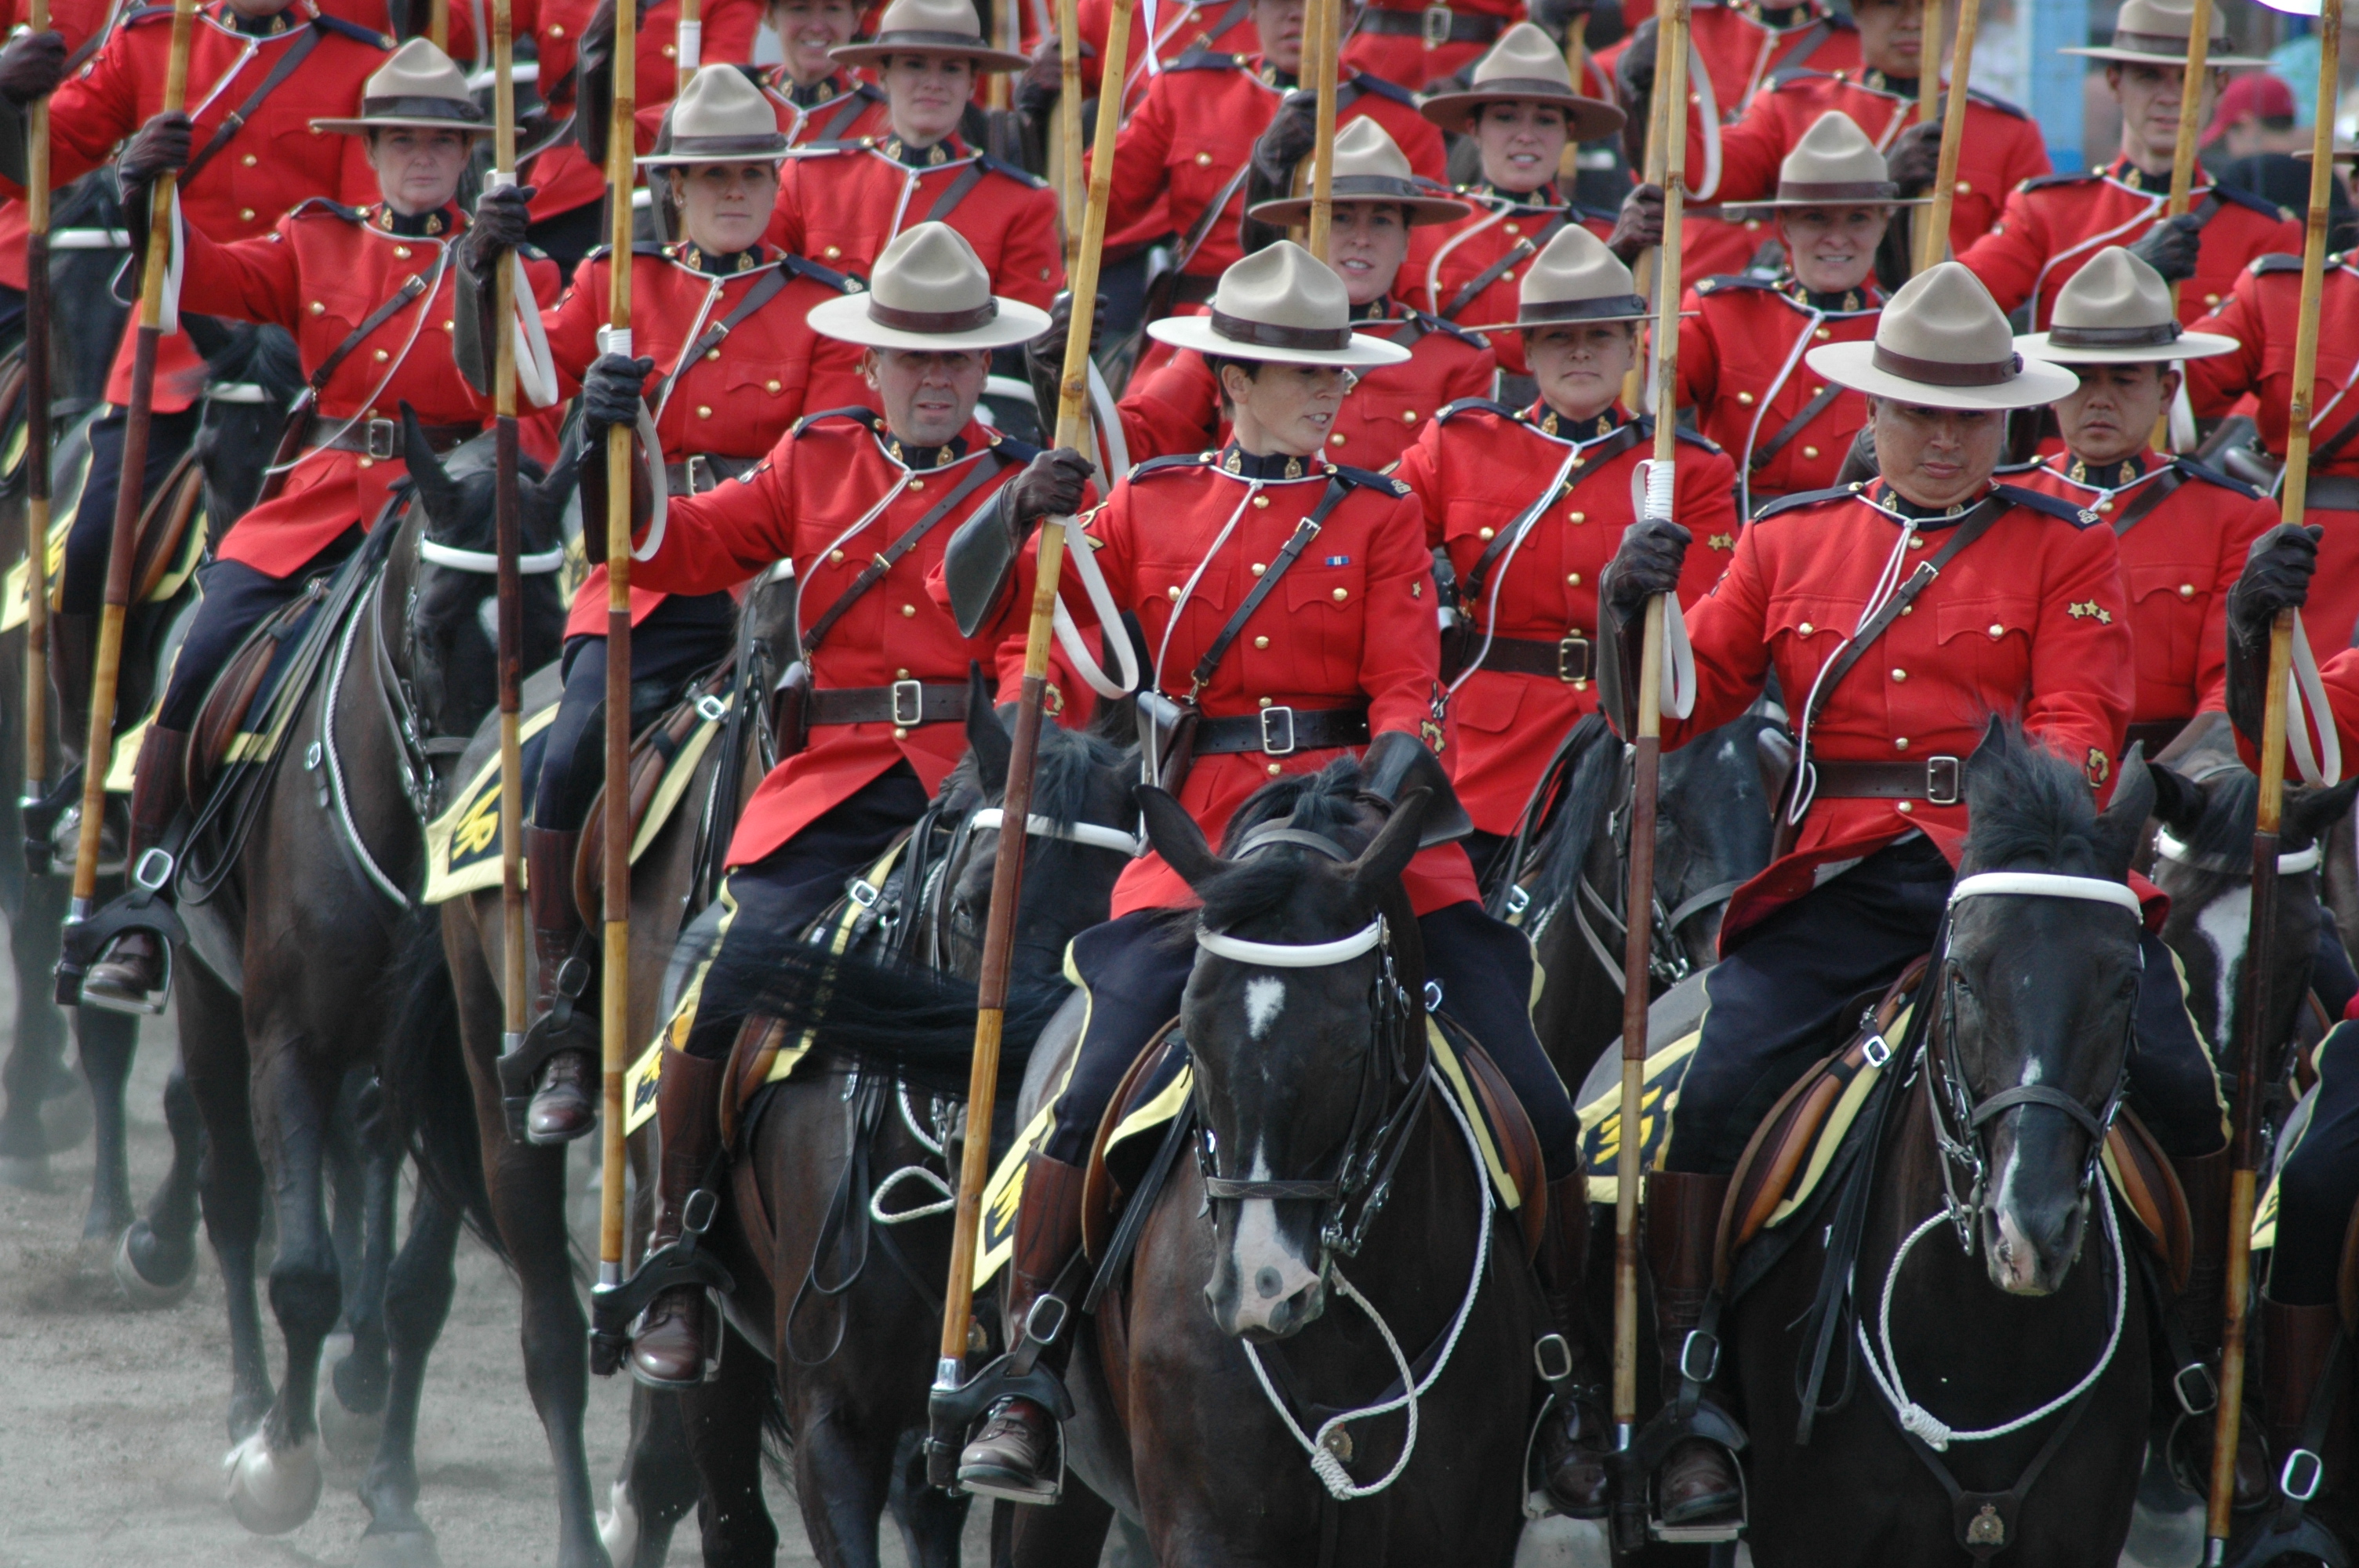 The Royal Canadian Mounted Police (RCMP) and anabolic steroid investigations